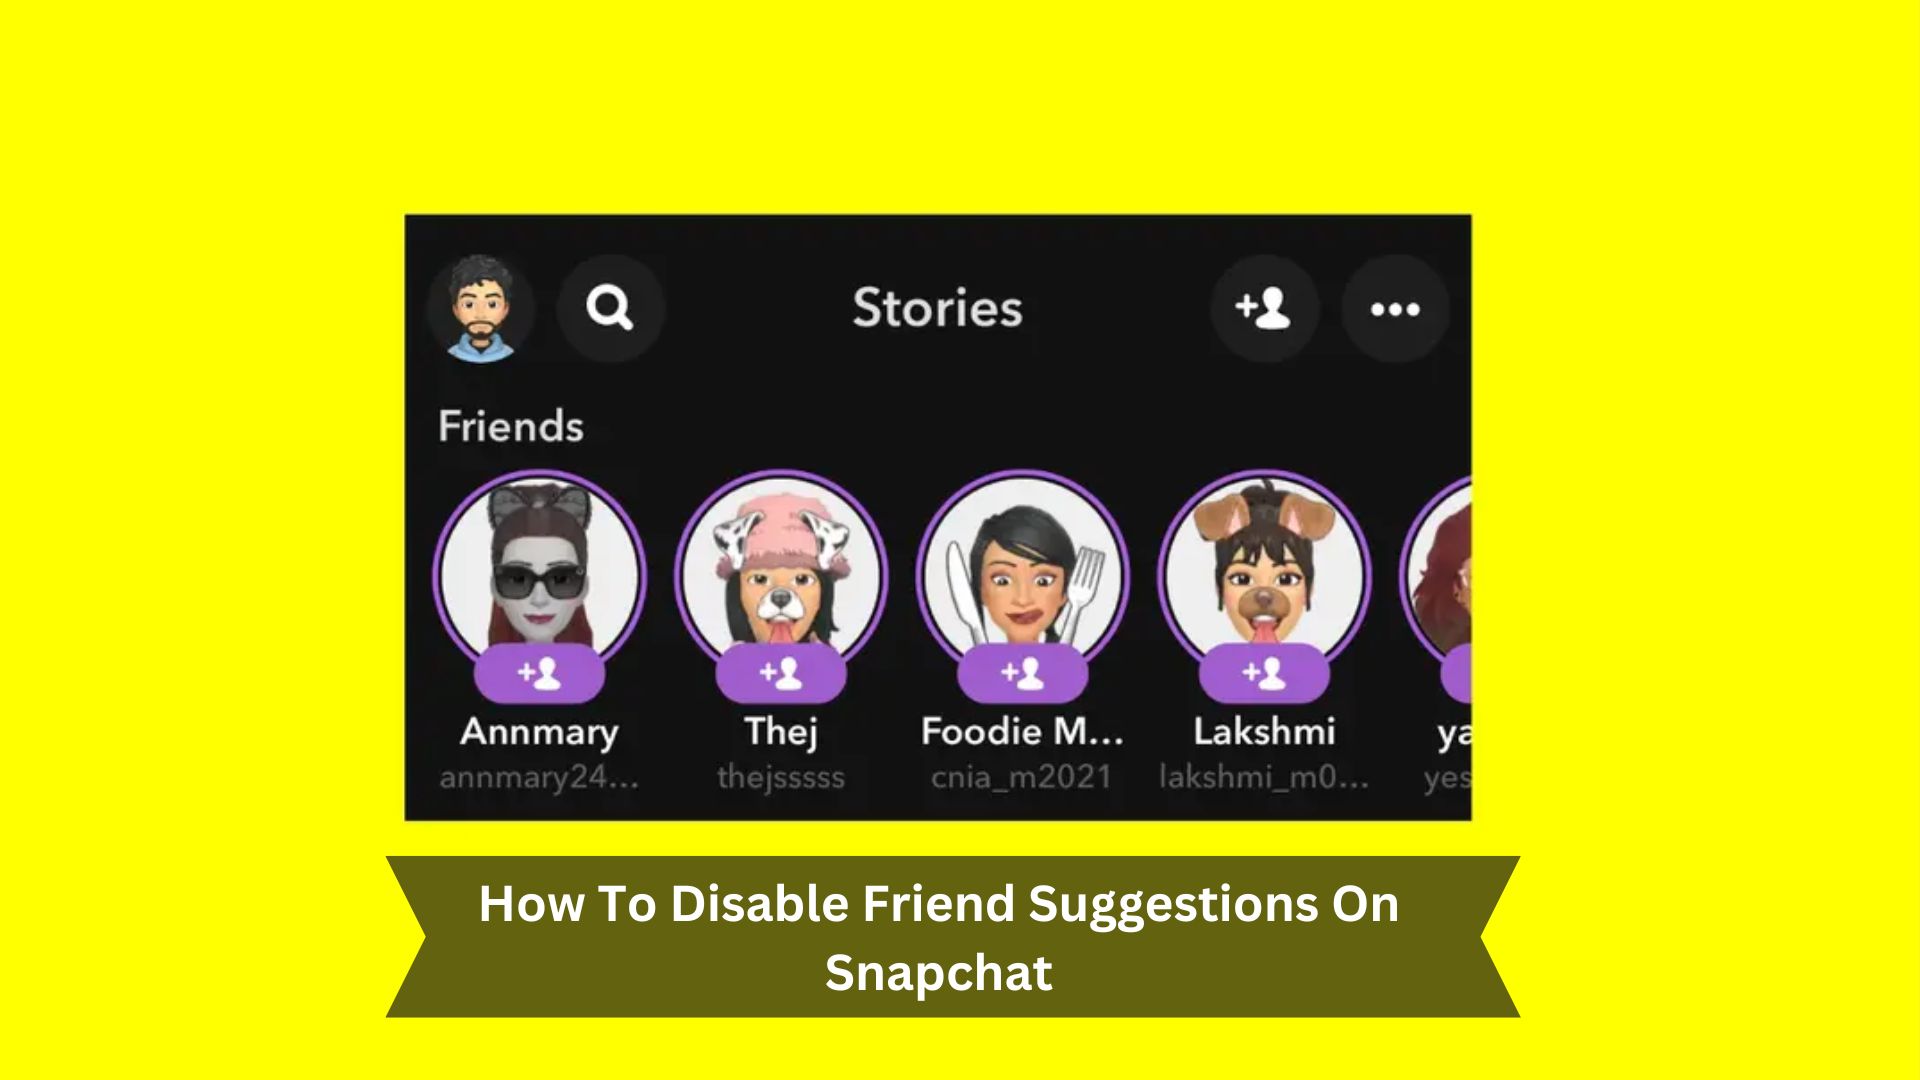 How To Disable Friend Suggestions On Snapchat